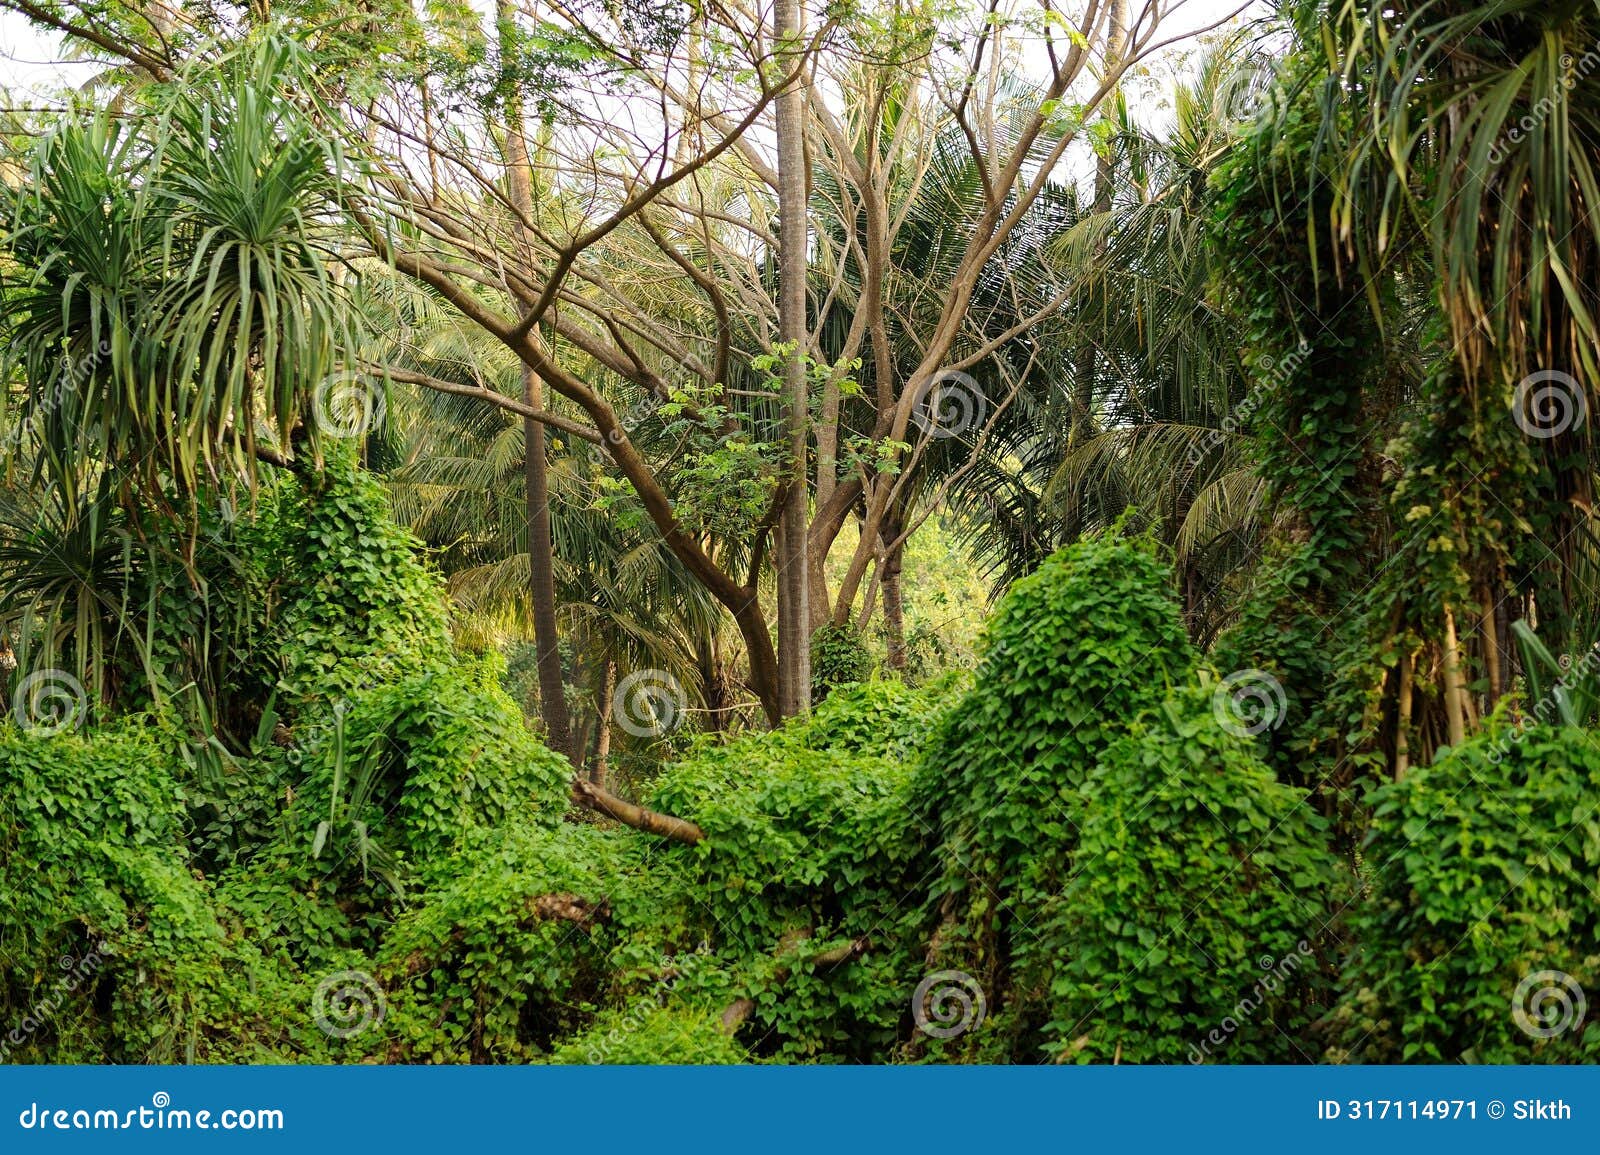 lush green foliage and towering trees of the indian jungle